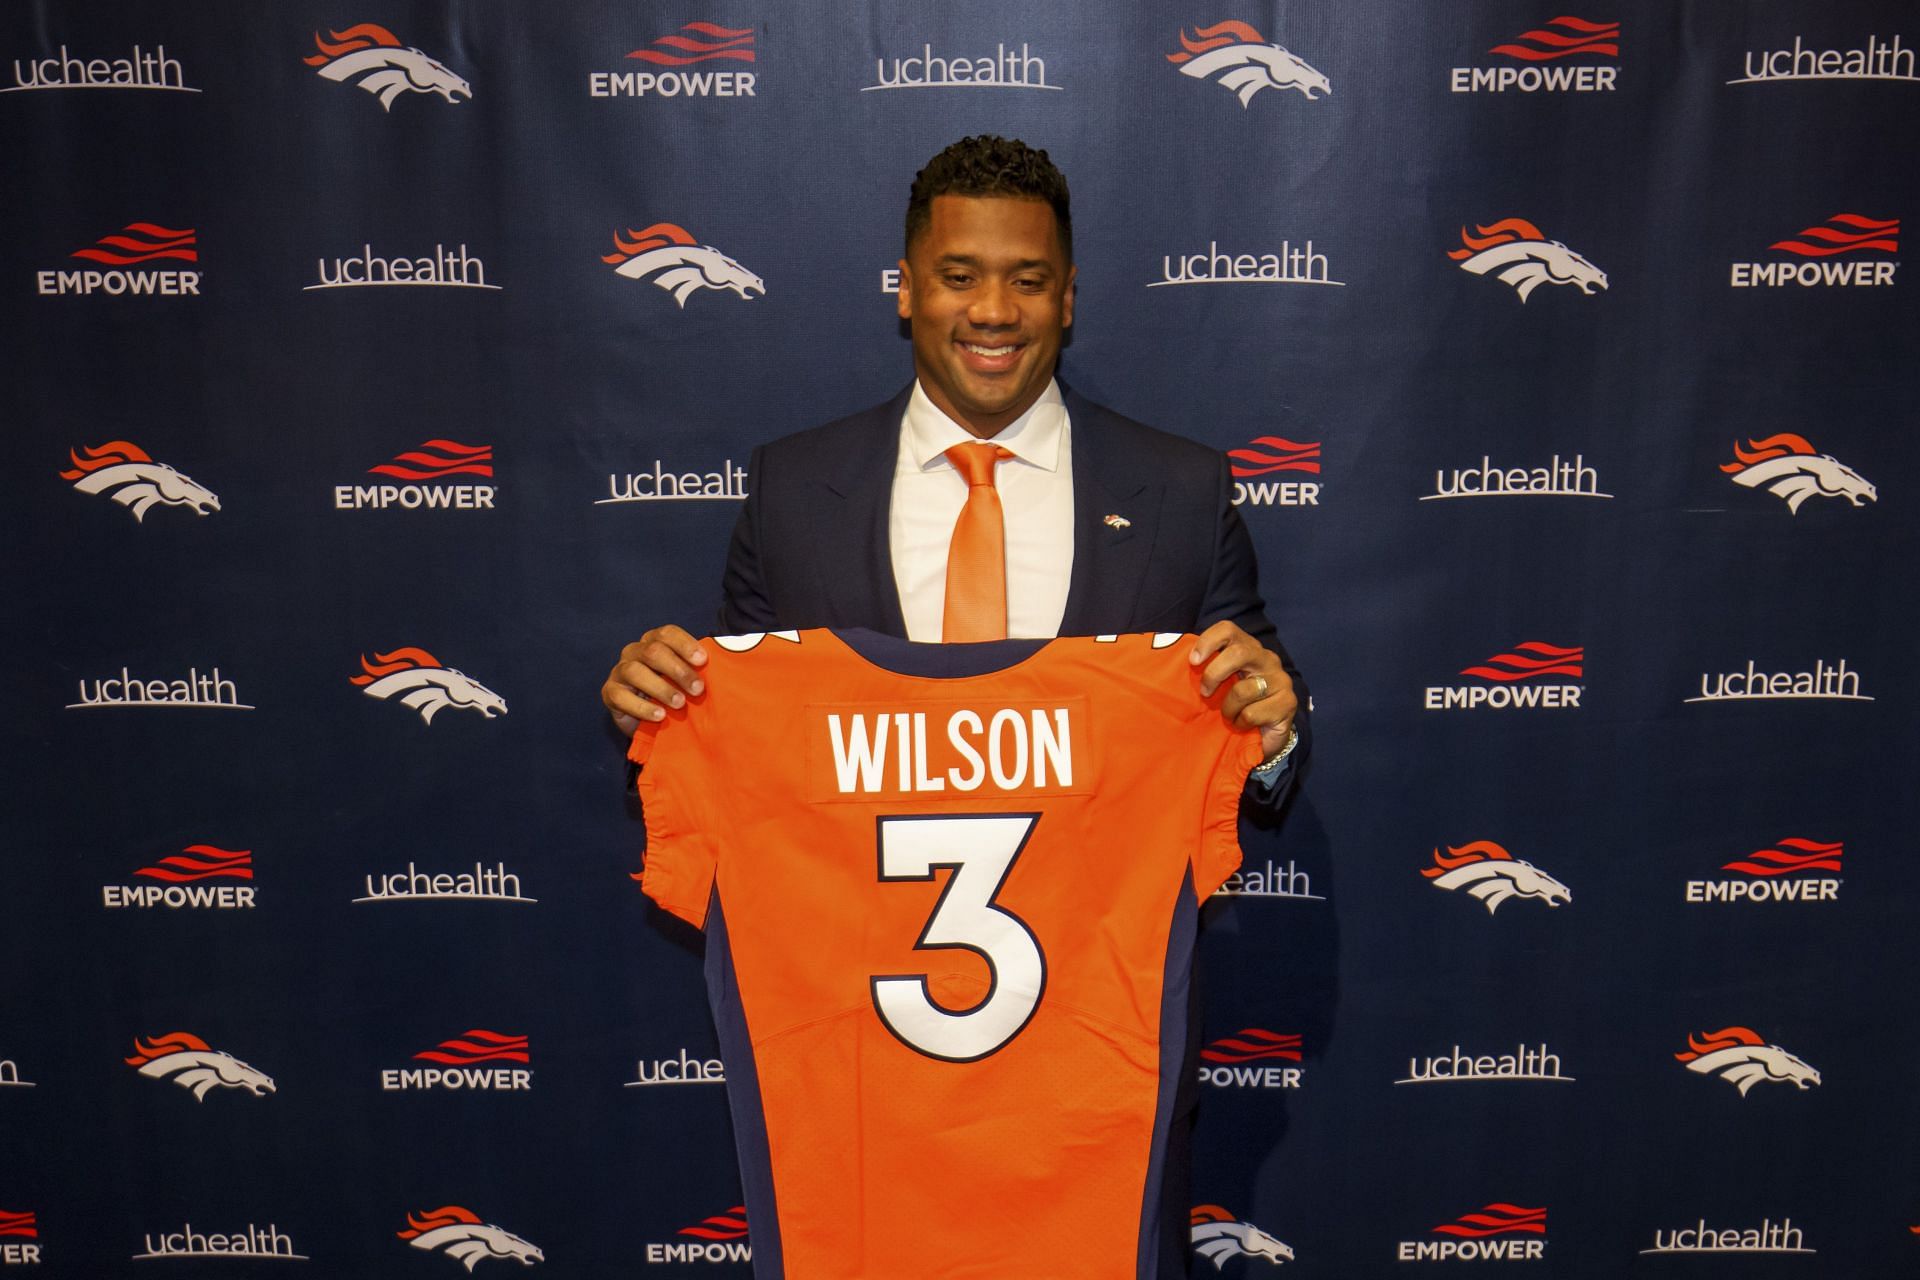 Russell Wilson shocked NFL fans by failing to live up to the hype in his Denver debut